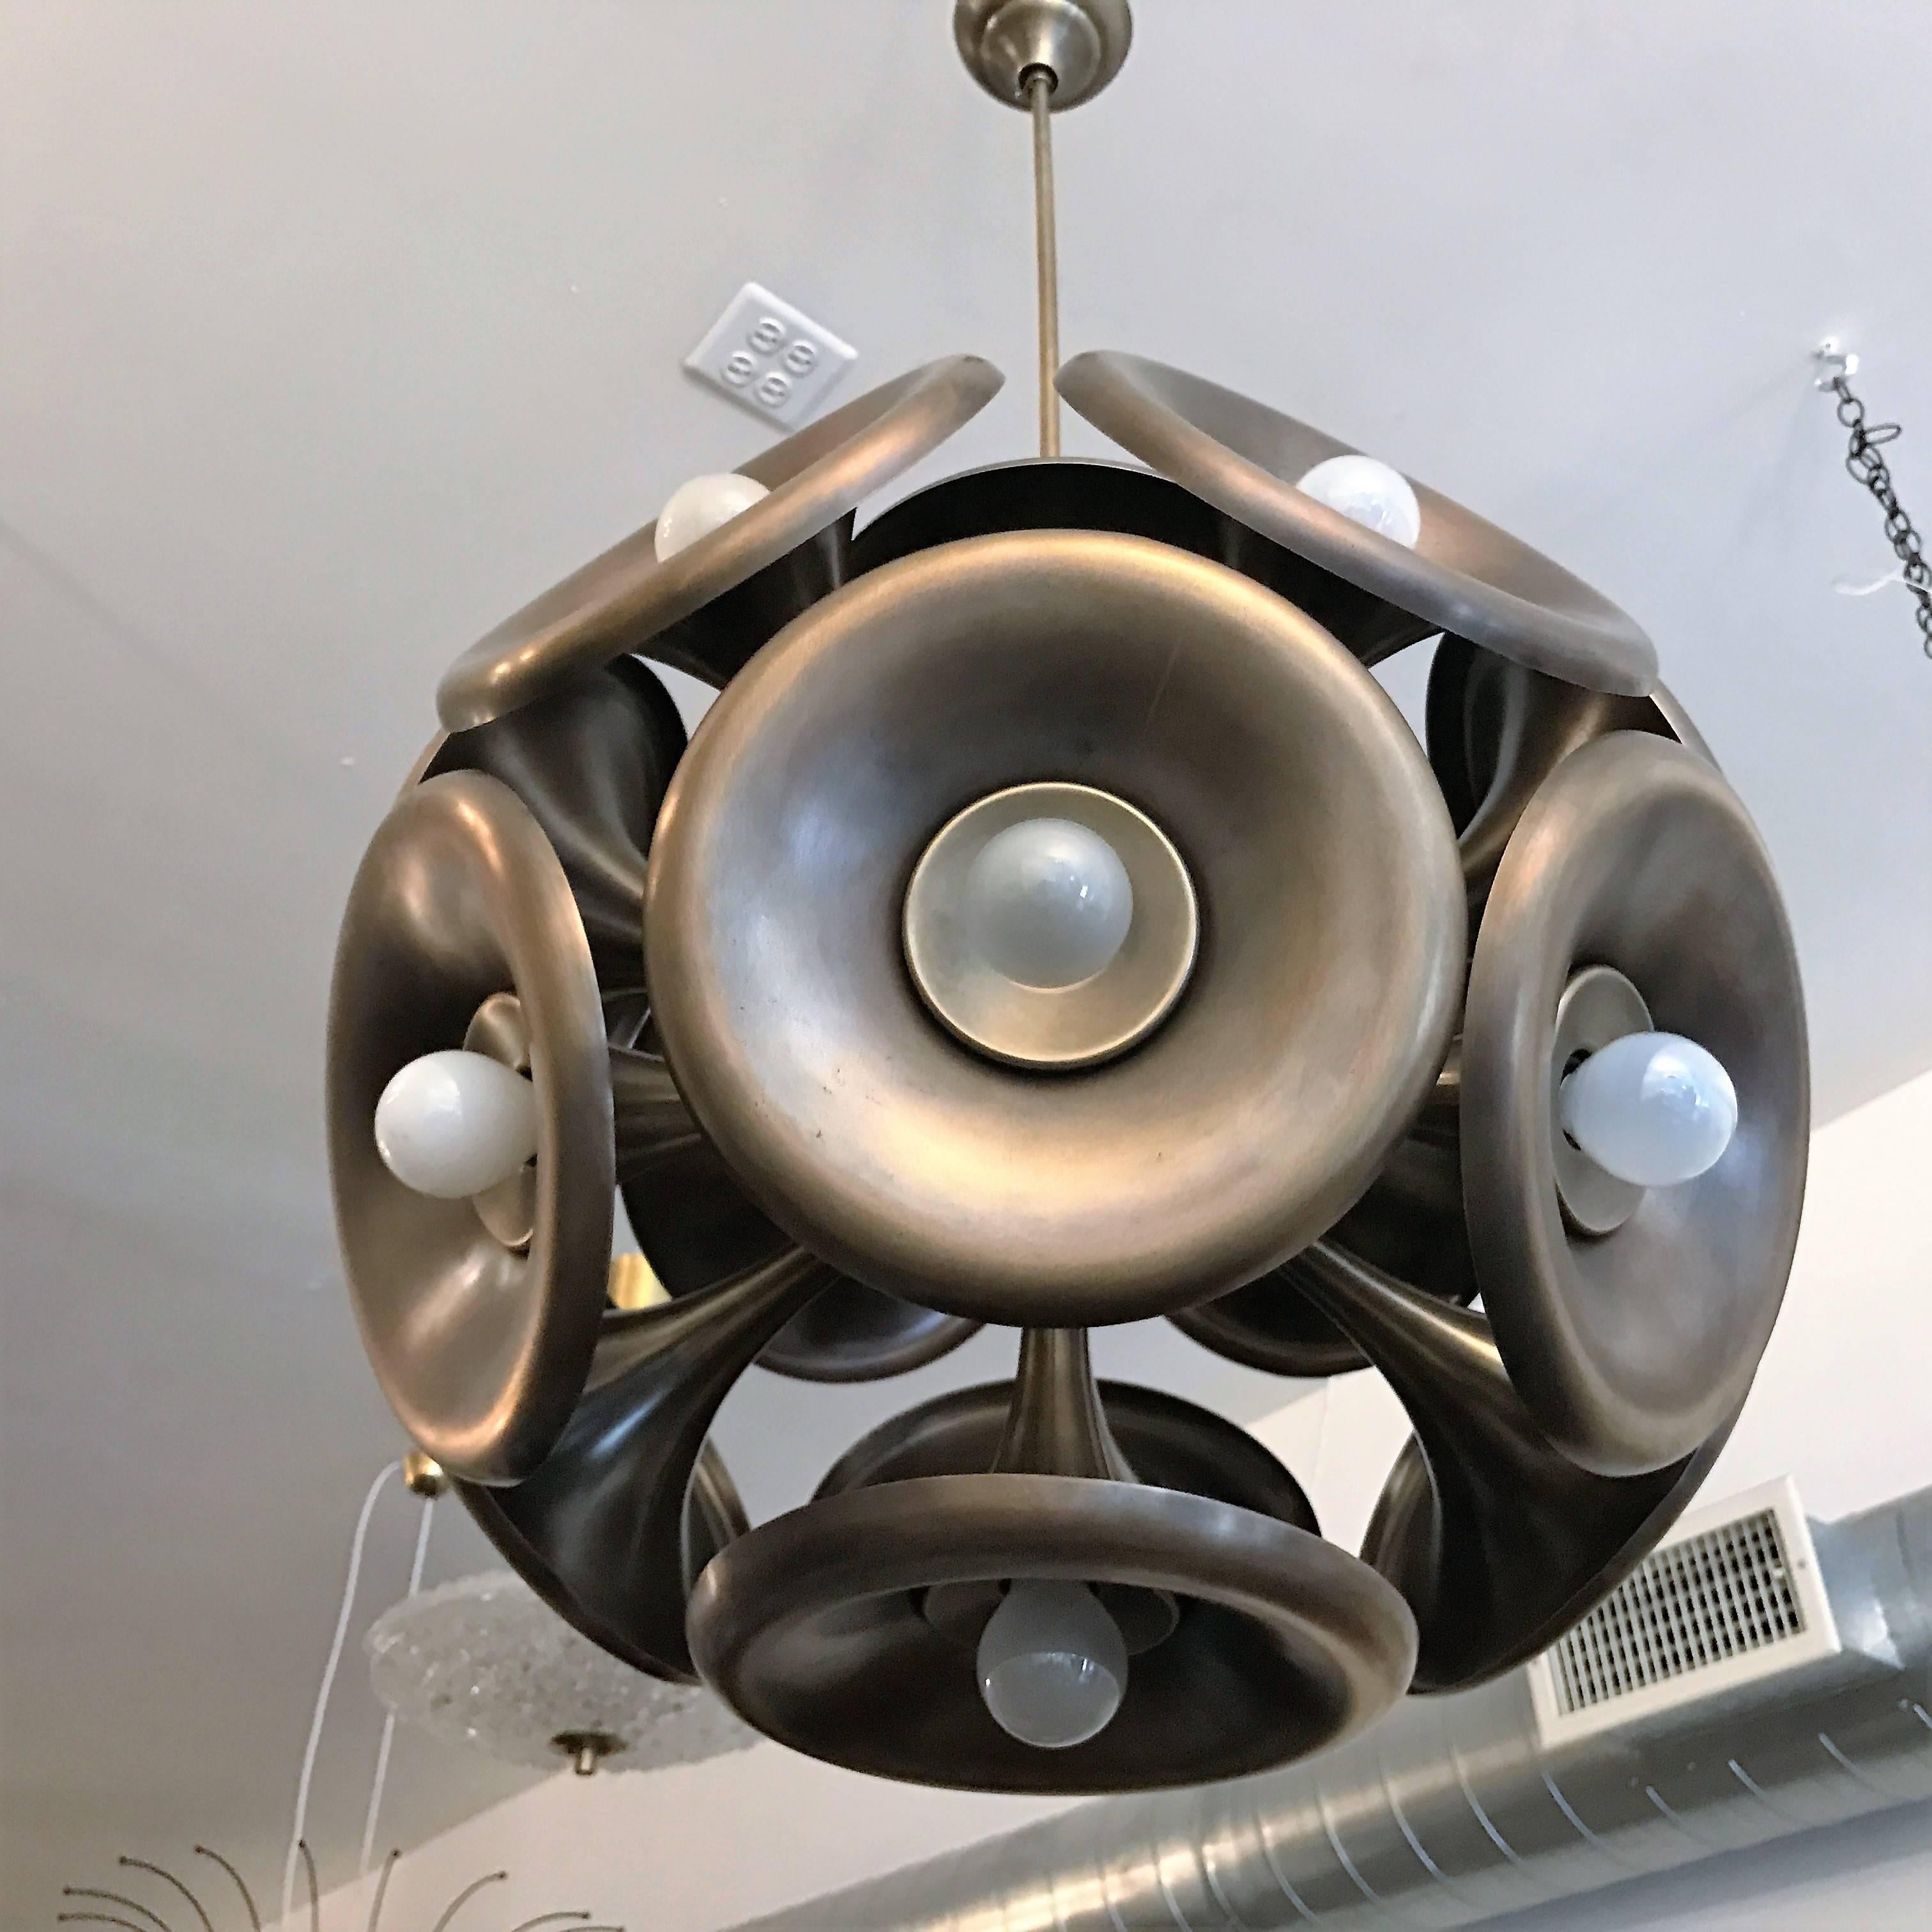 A great, rare 1960s Space Age pendant in a wonderful uniform dark aged brass made by the Italian lighting company, Esperia. Newly rewired. 

Biography:
Esperia SRL was founded in 1952. Exclusive and original collections were created by noted